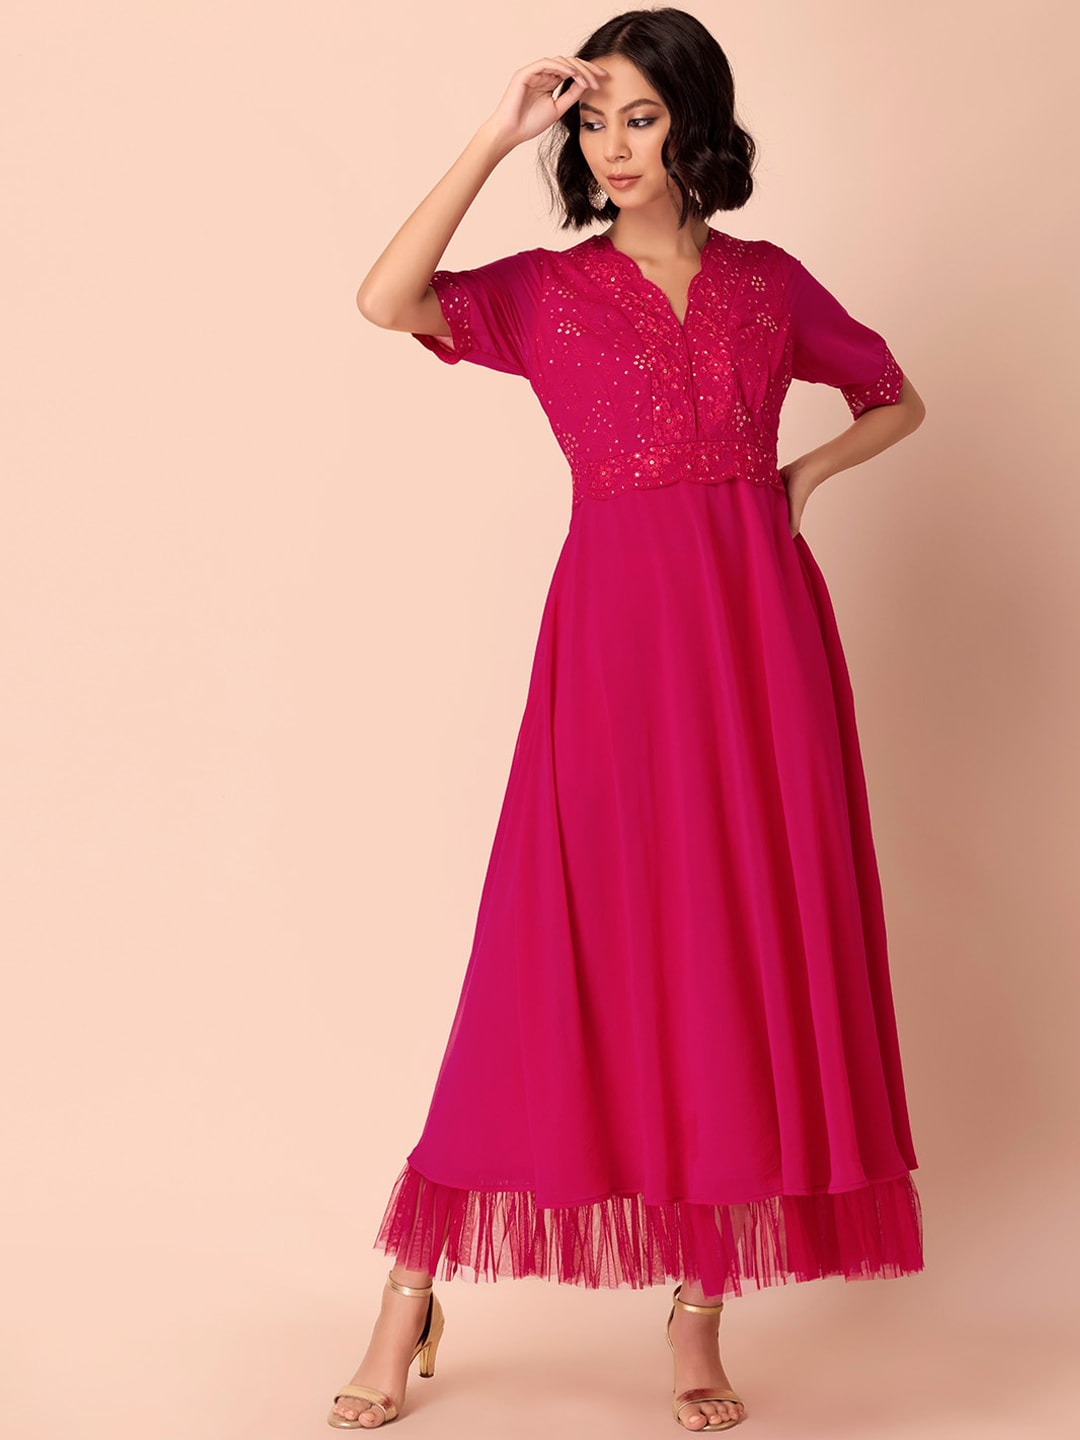 INDYA Pink Sequins Embroidered Ethnic A-Line Maxi Dress Price in India